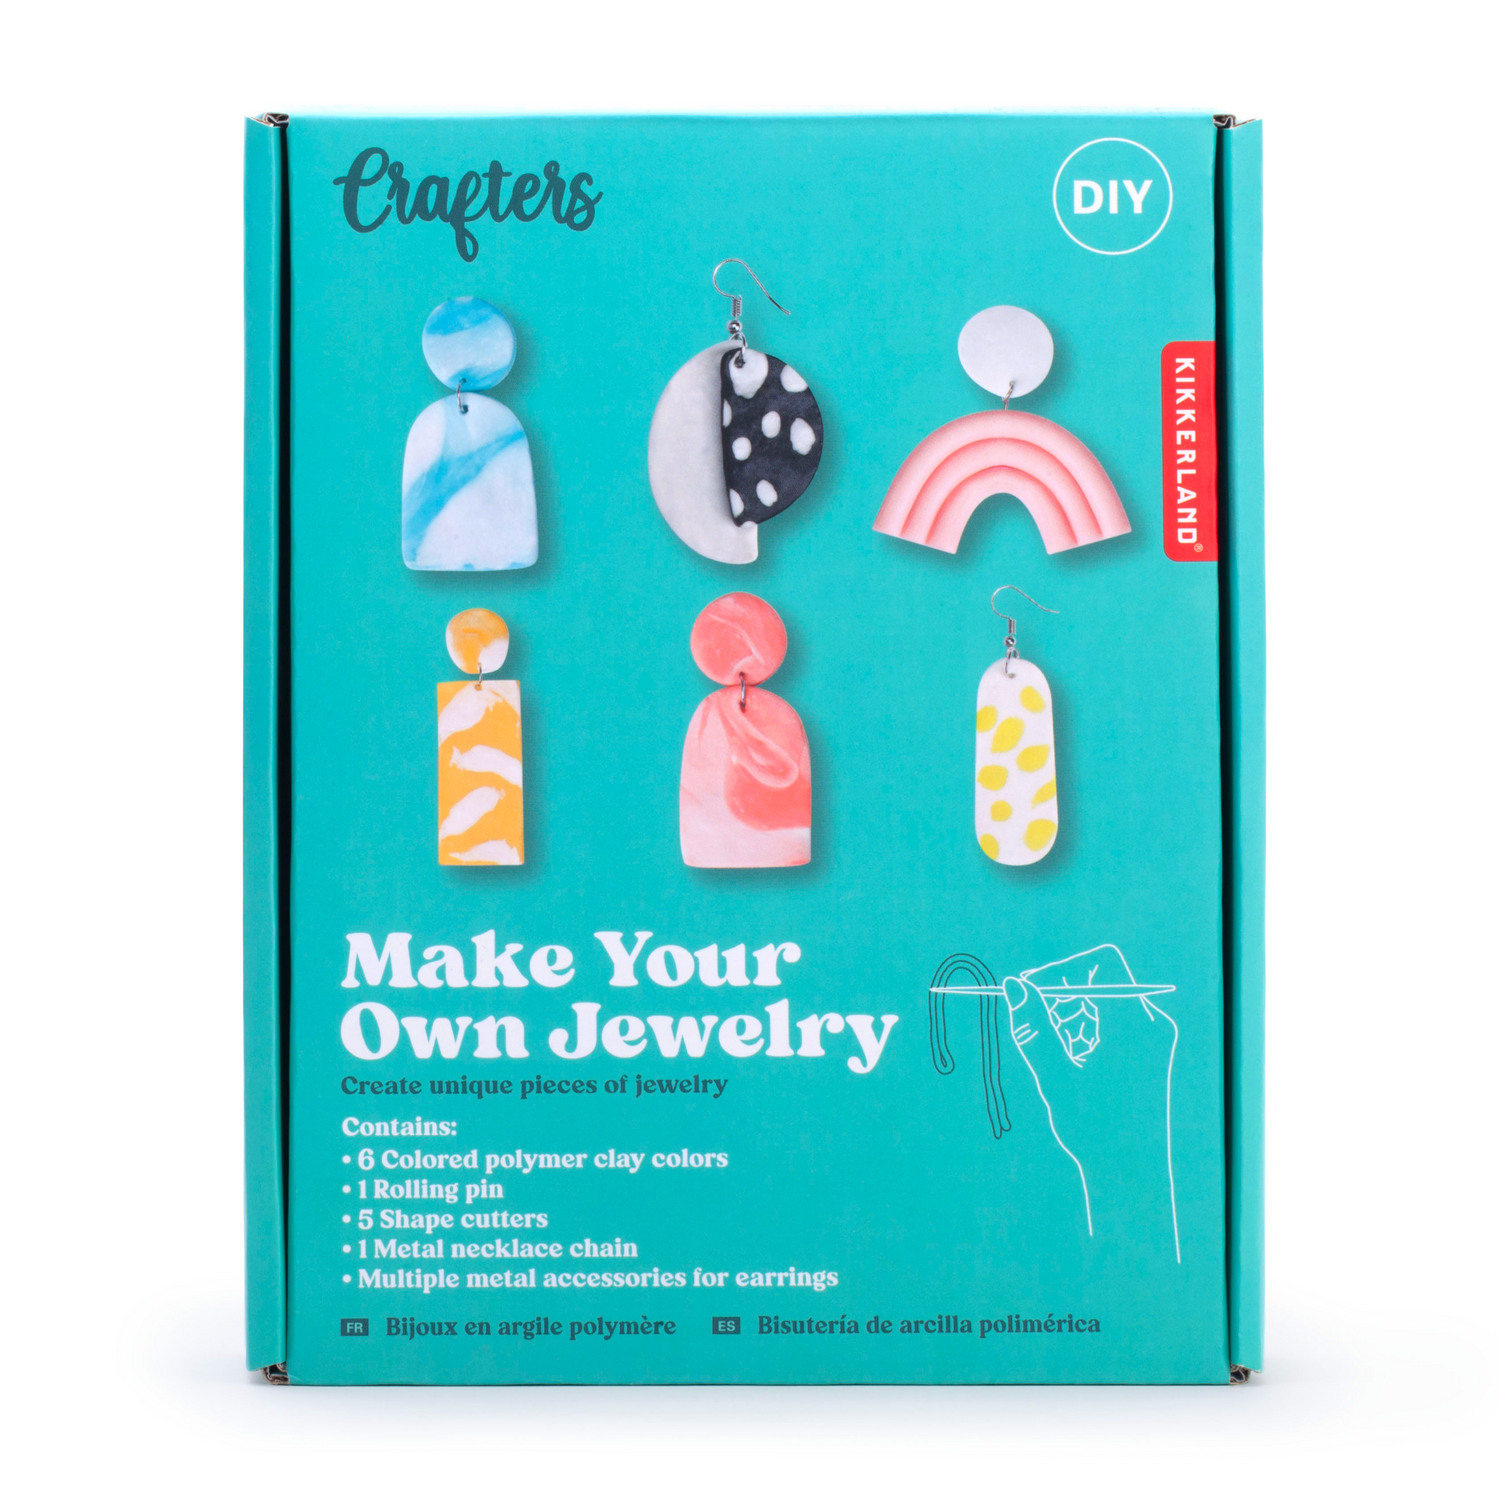 Crafters Clay Jewelry Kit